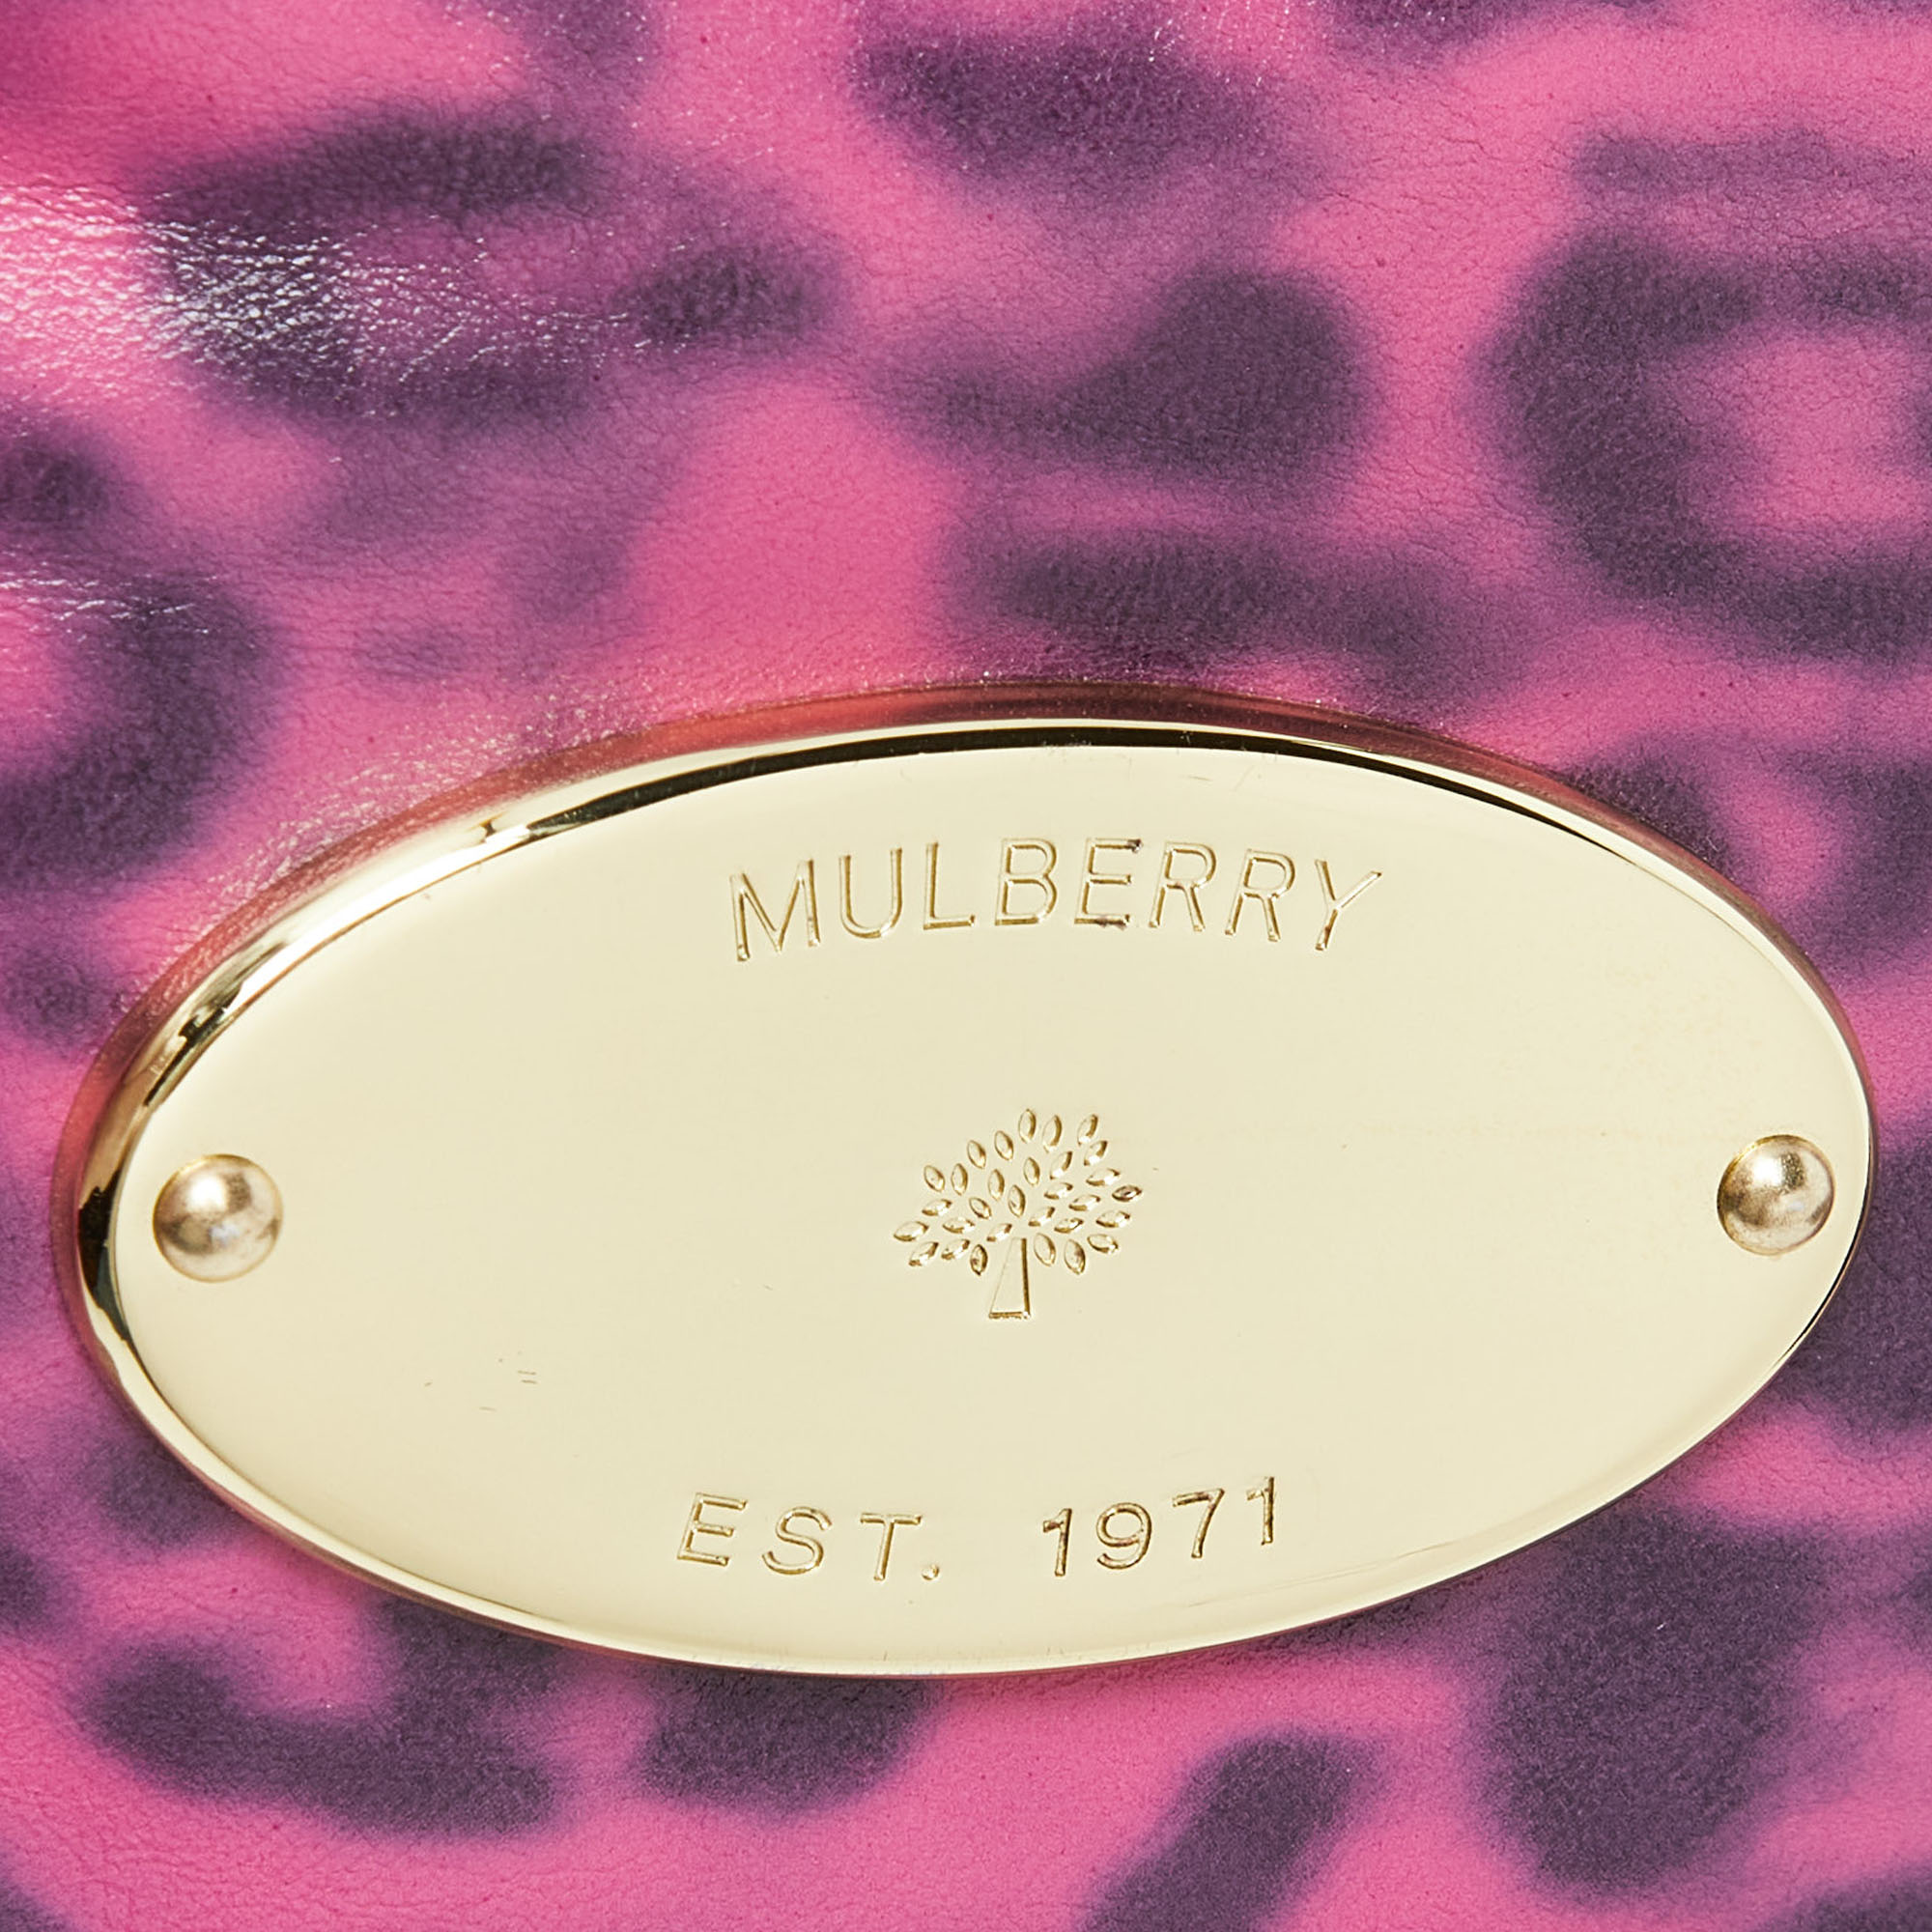 Mulberry Pink Leopard Print Leather Zip Pouch